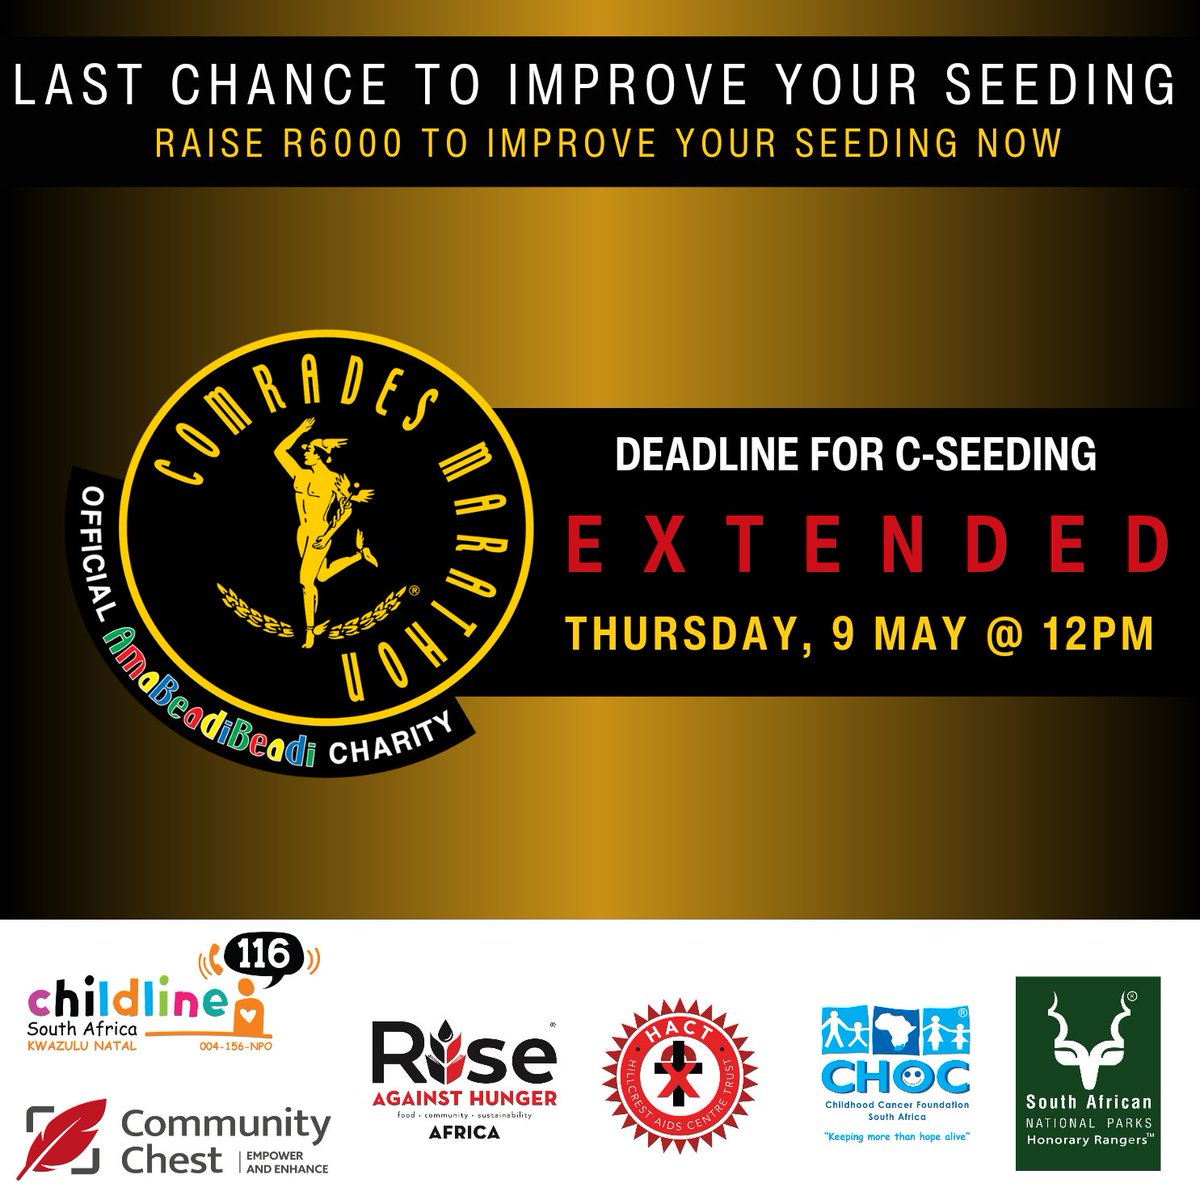 Did you get the seeding batch you were wanting for #Comrades2024? Be honest, DID YOU???🤔

Here is your last chance to improve your seeding. Sign up for Race4Charity and raise a minimum of R6 000 by Thursday, 9 May at 12 noon.